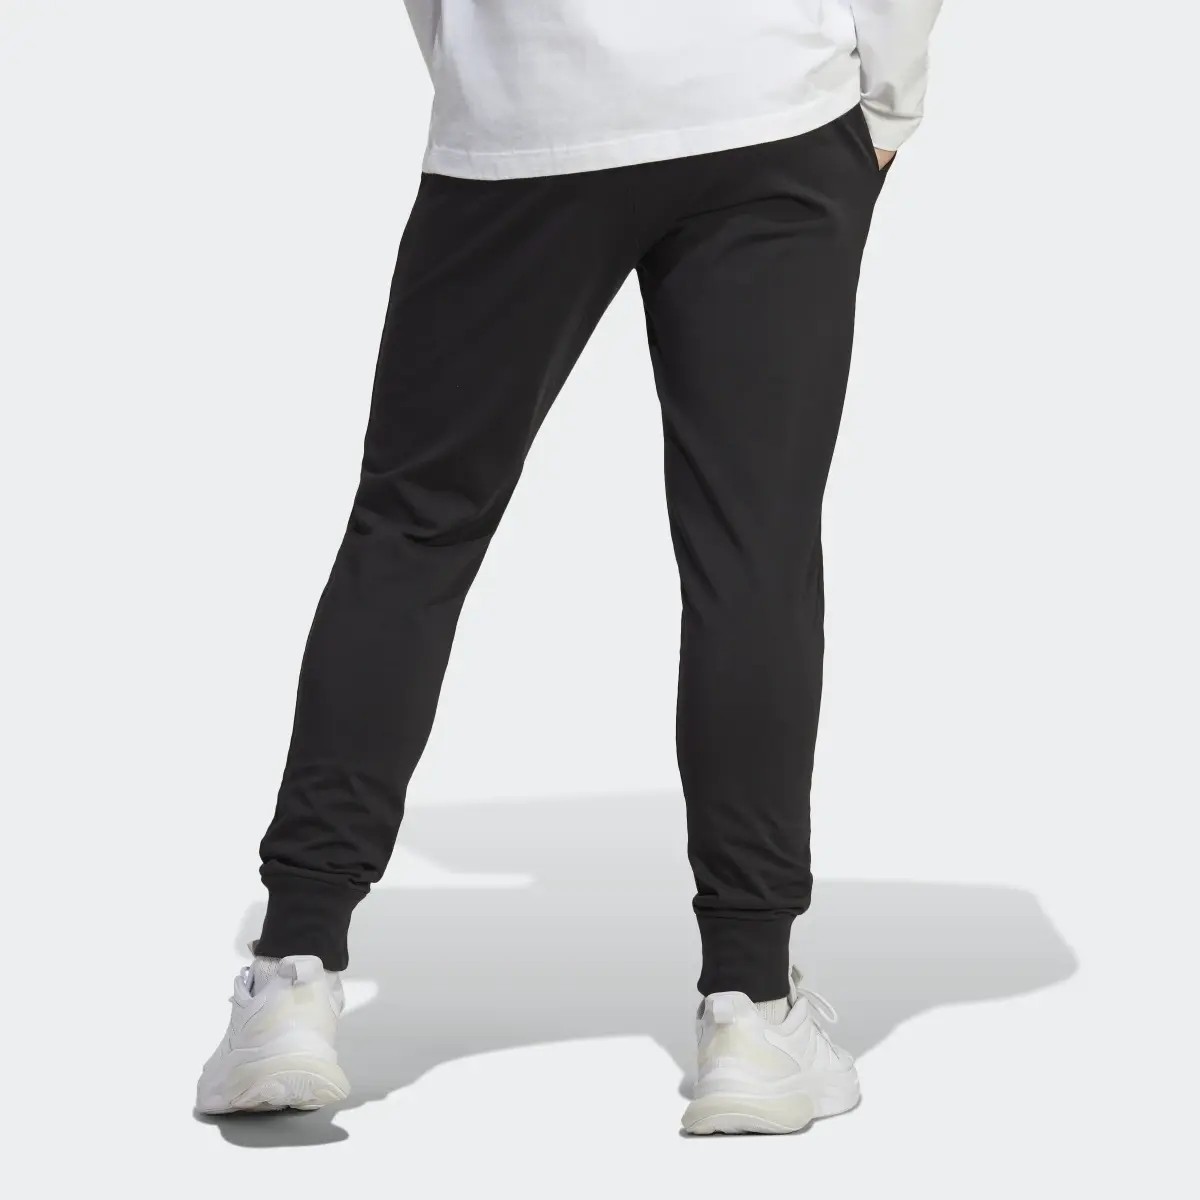 Adidas Essentials Single Jersey Tapered Cuff Pants. 3